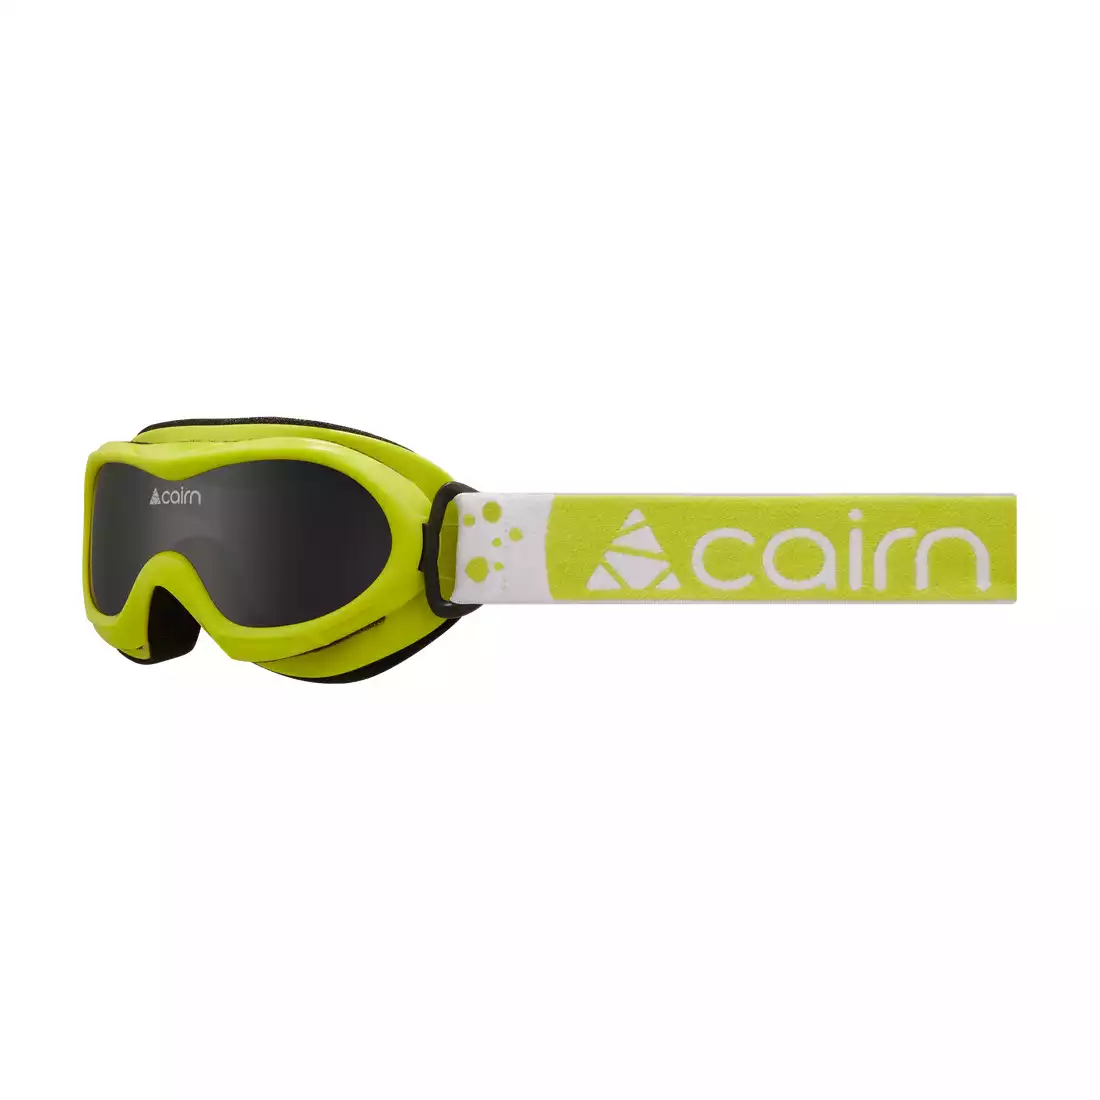 CAIRN BUG children's bicycle goggles, green